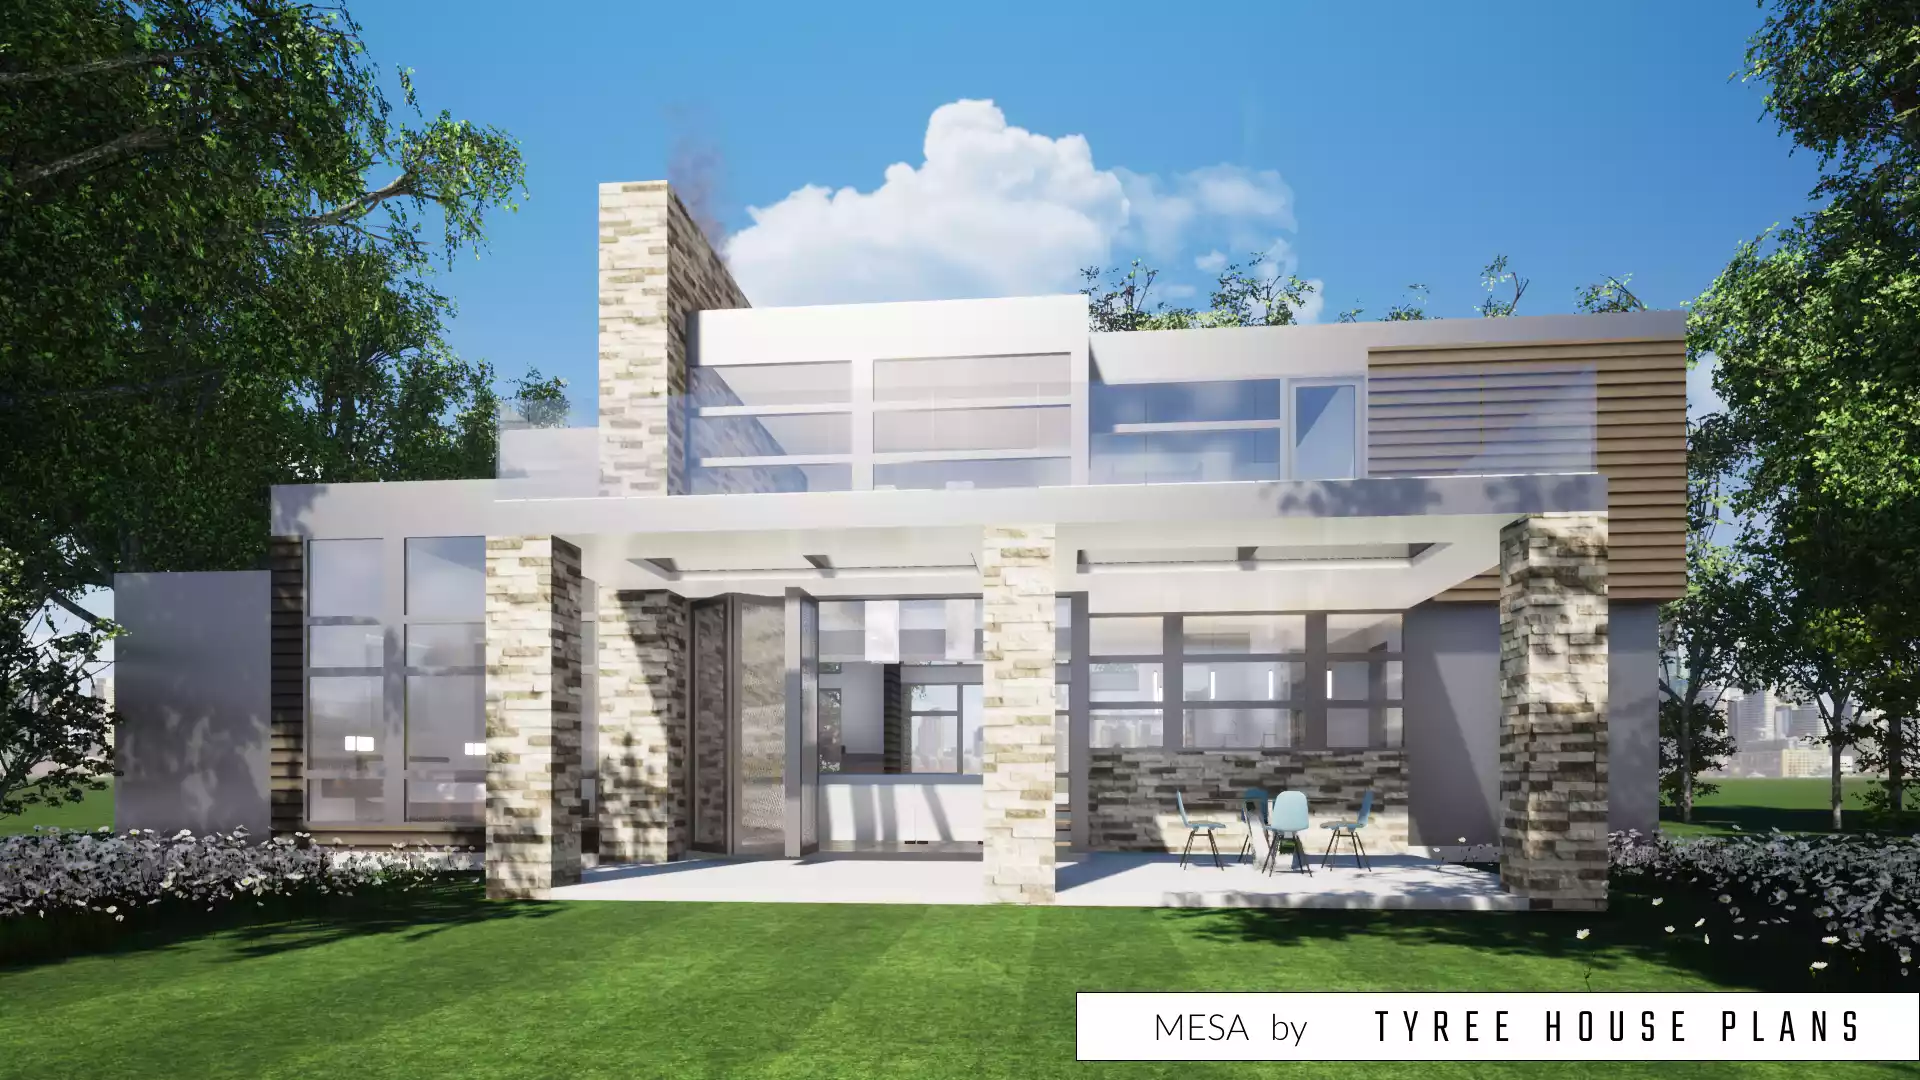 Rear porch with sundeck above. Mesa by Tyree House Plans.